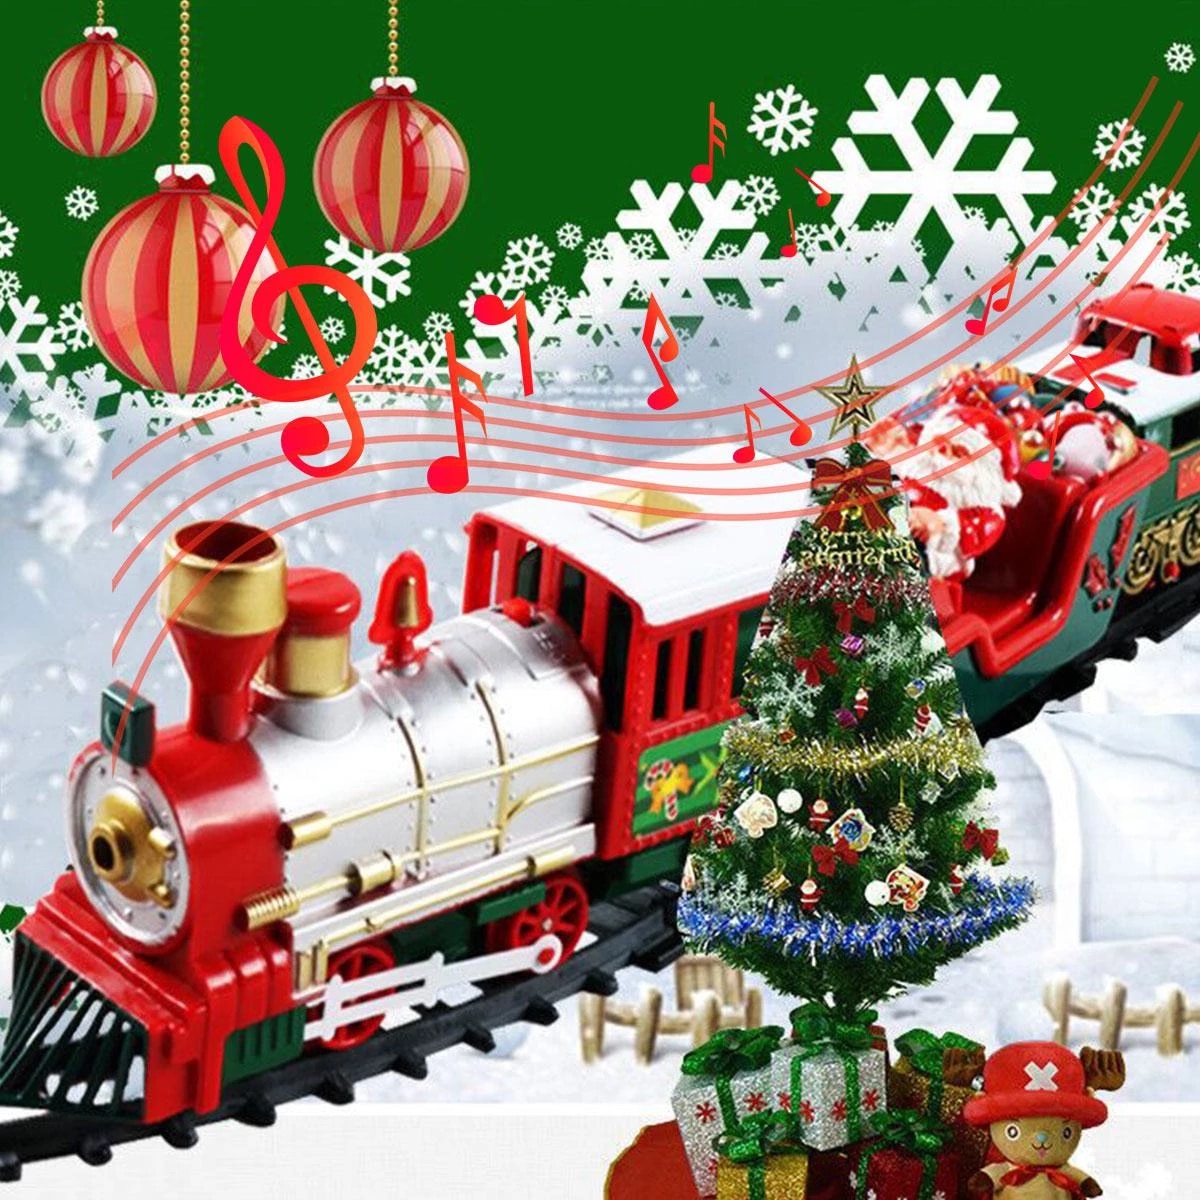 Christmas Electric Train Toys Railway Toy Cars Racing Track With Music Santa Claus Christmas Tree Decoration Train Model Toys alx